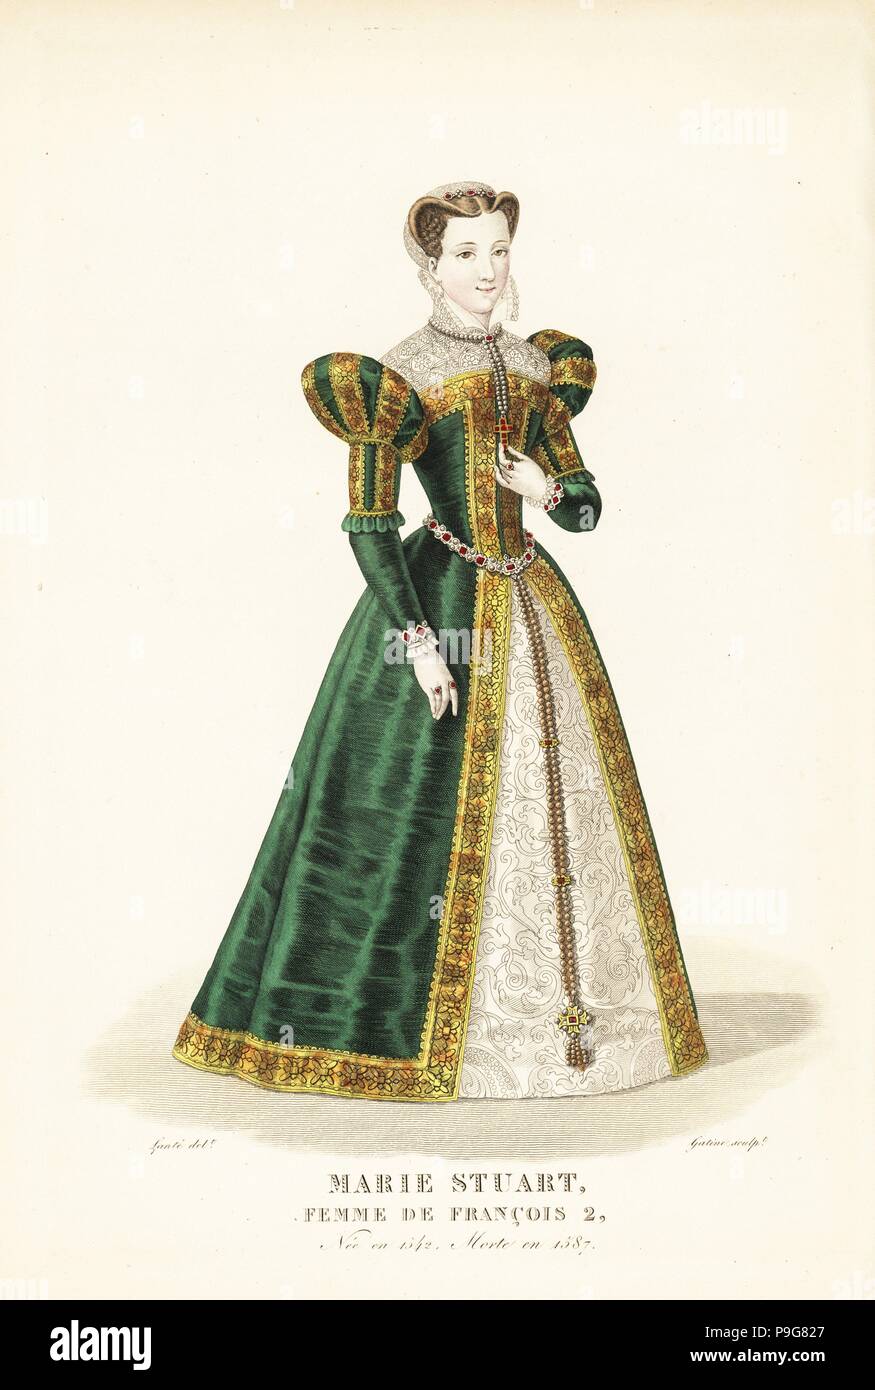 Mary Stuart of Scotland, wife of King Francis II of France, 1542-1587. She wears a lace cap, green surtout with shoulder pads and band of gold embroidery, damask petticoat, and belt and bracelet with gemstones. Handcoloured copperplate engraving by Georges Jacques Gatine after an illustration by Louis Marie Lante from Galerie Francaise de Femmes Celebres, Paris, 1827. Stock Photo